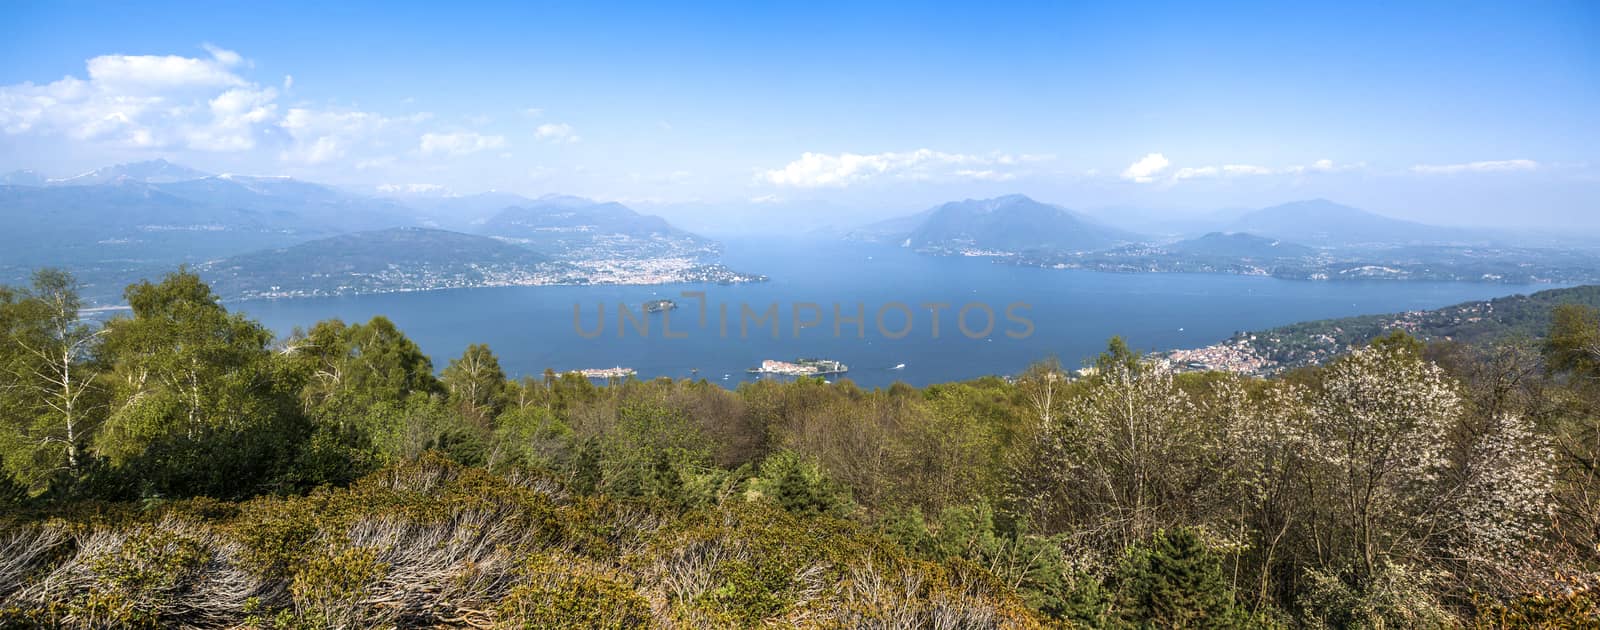 Panoramic view from Mottarone on the Maggiore Lake, Stresa - Italy